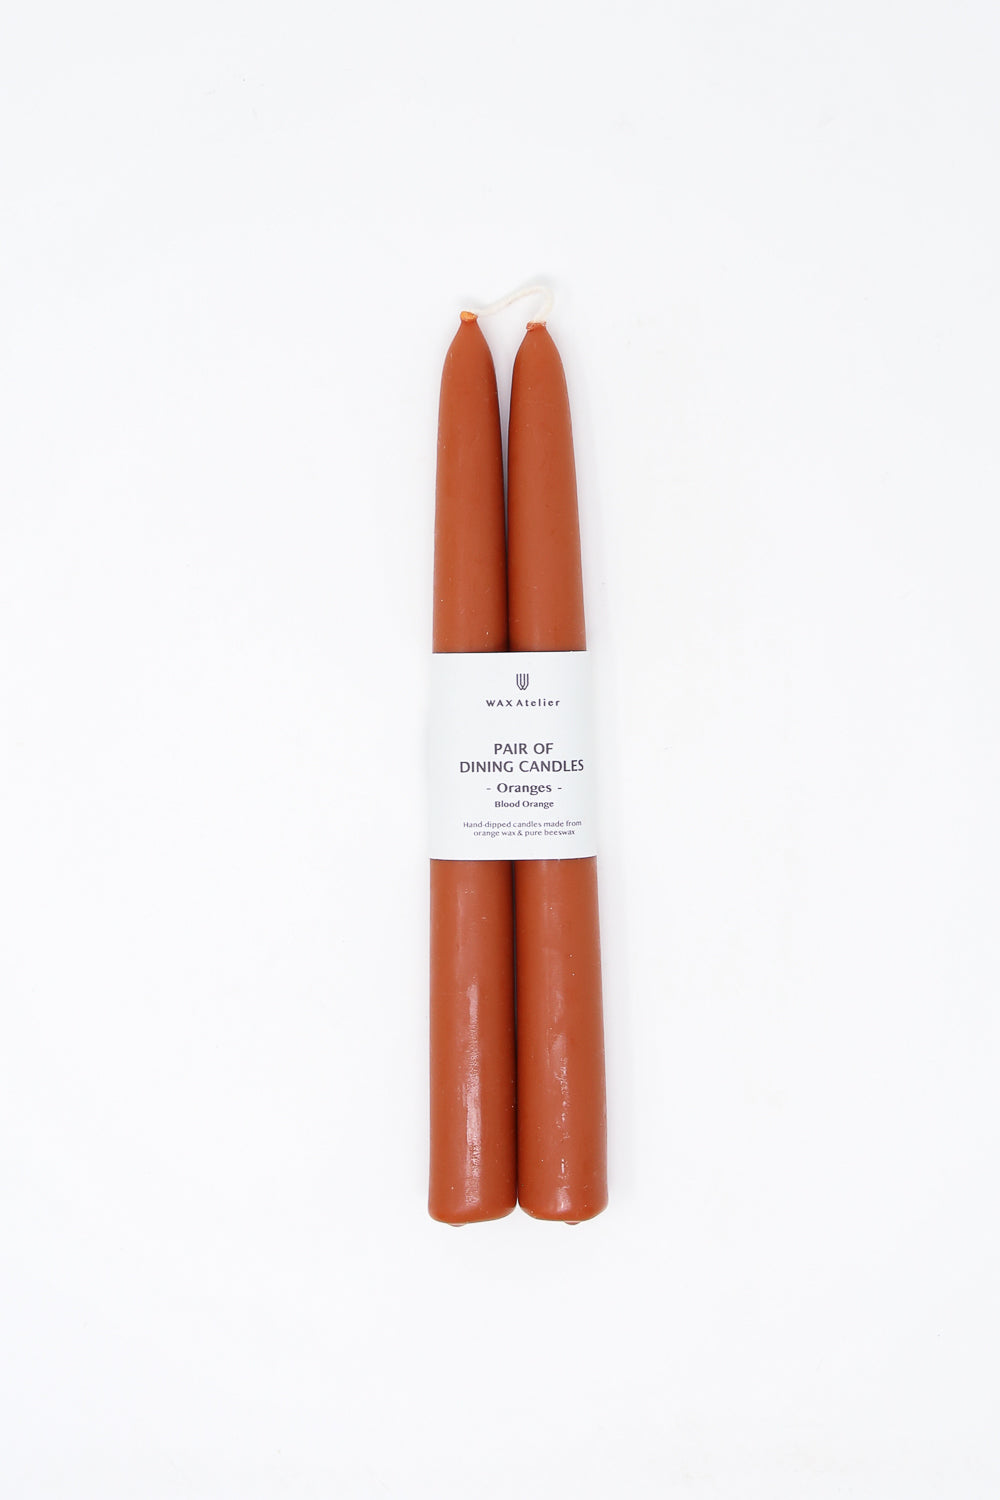 Wax Atelier Beeswax Dining Candles in Blood Orange